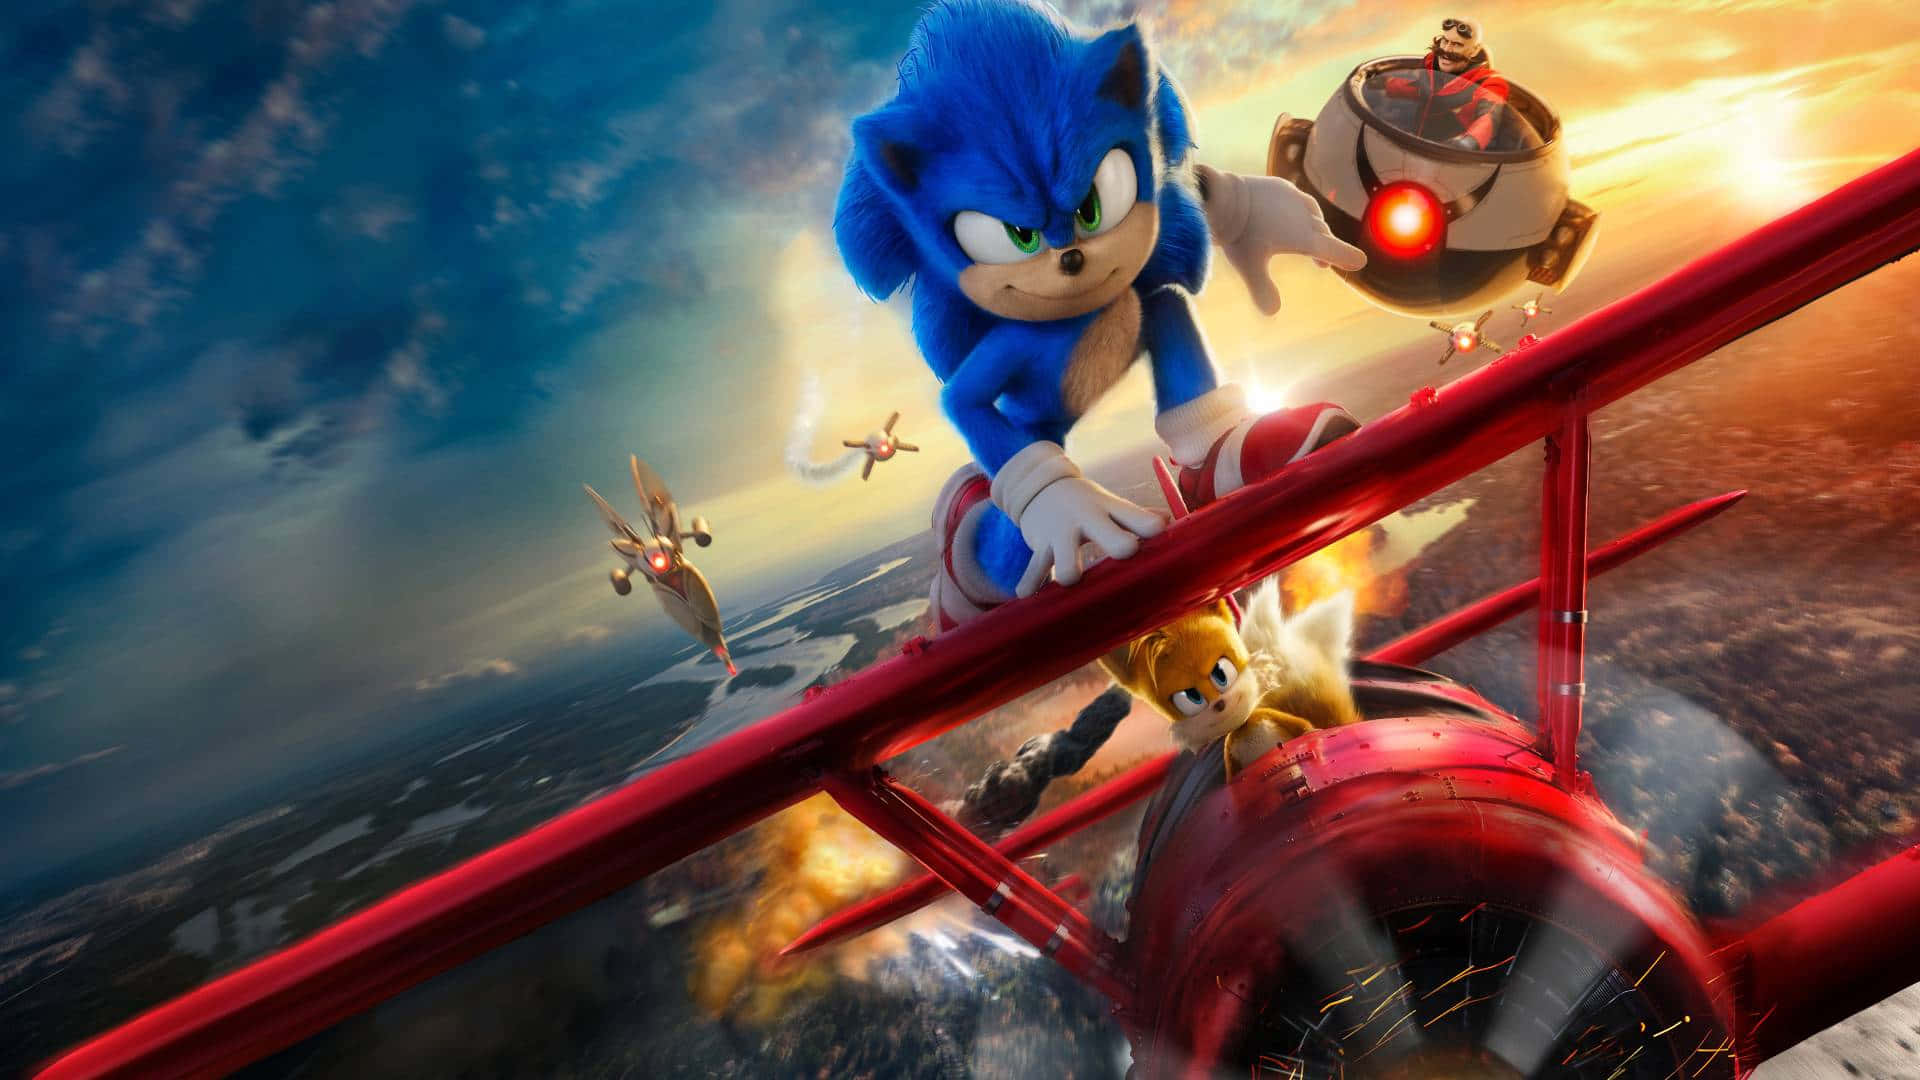 Vibrant Sonic Art featuring Sonic the Hedgehog in Action Wallpaper